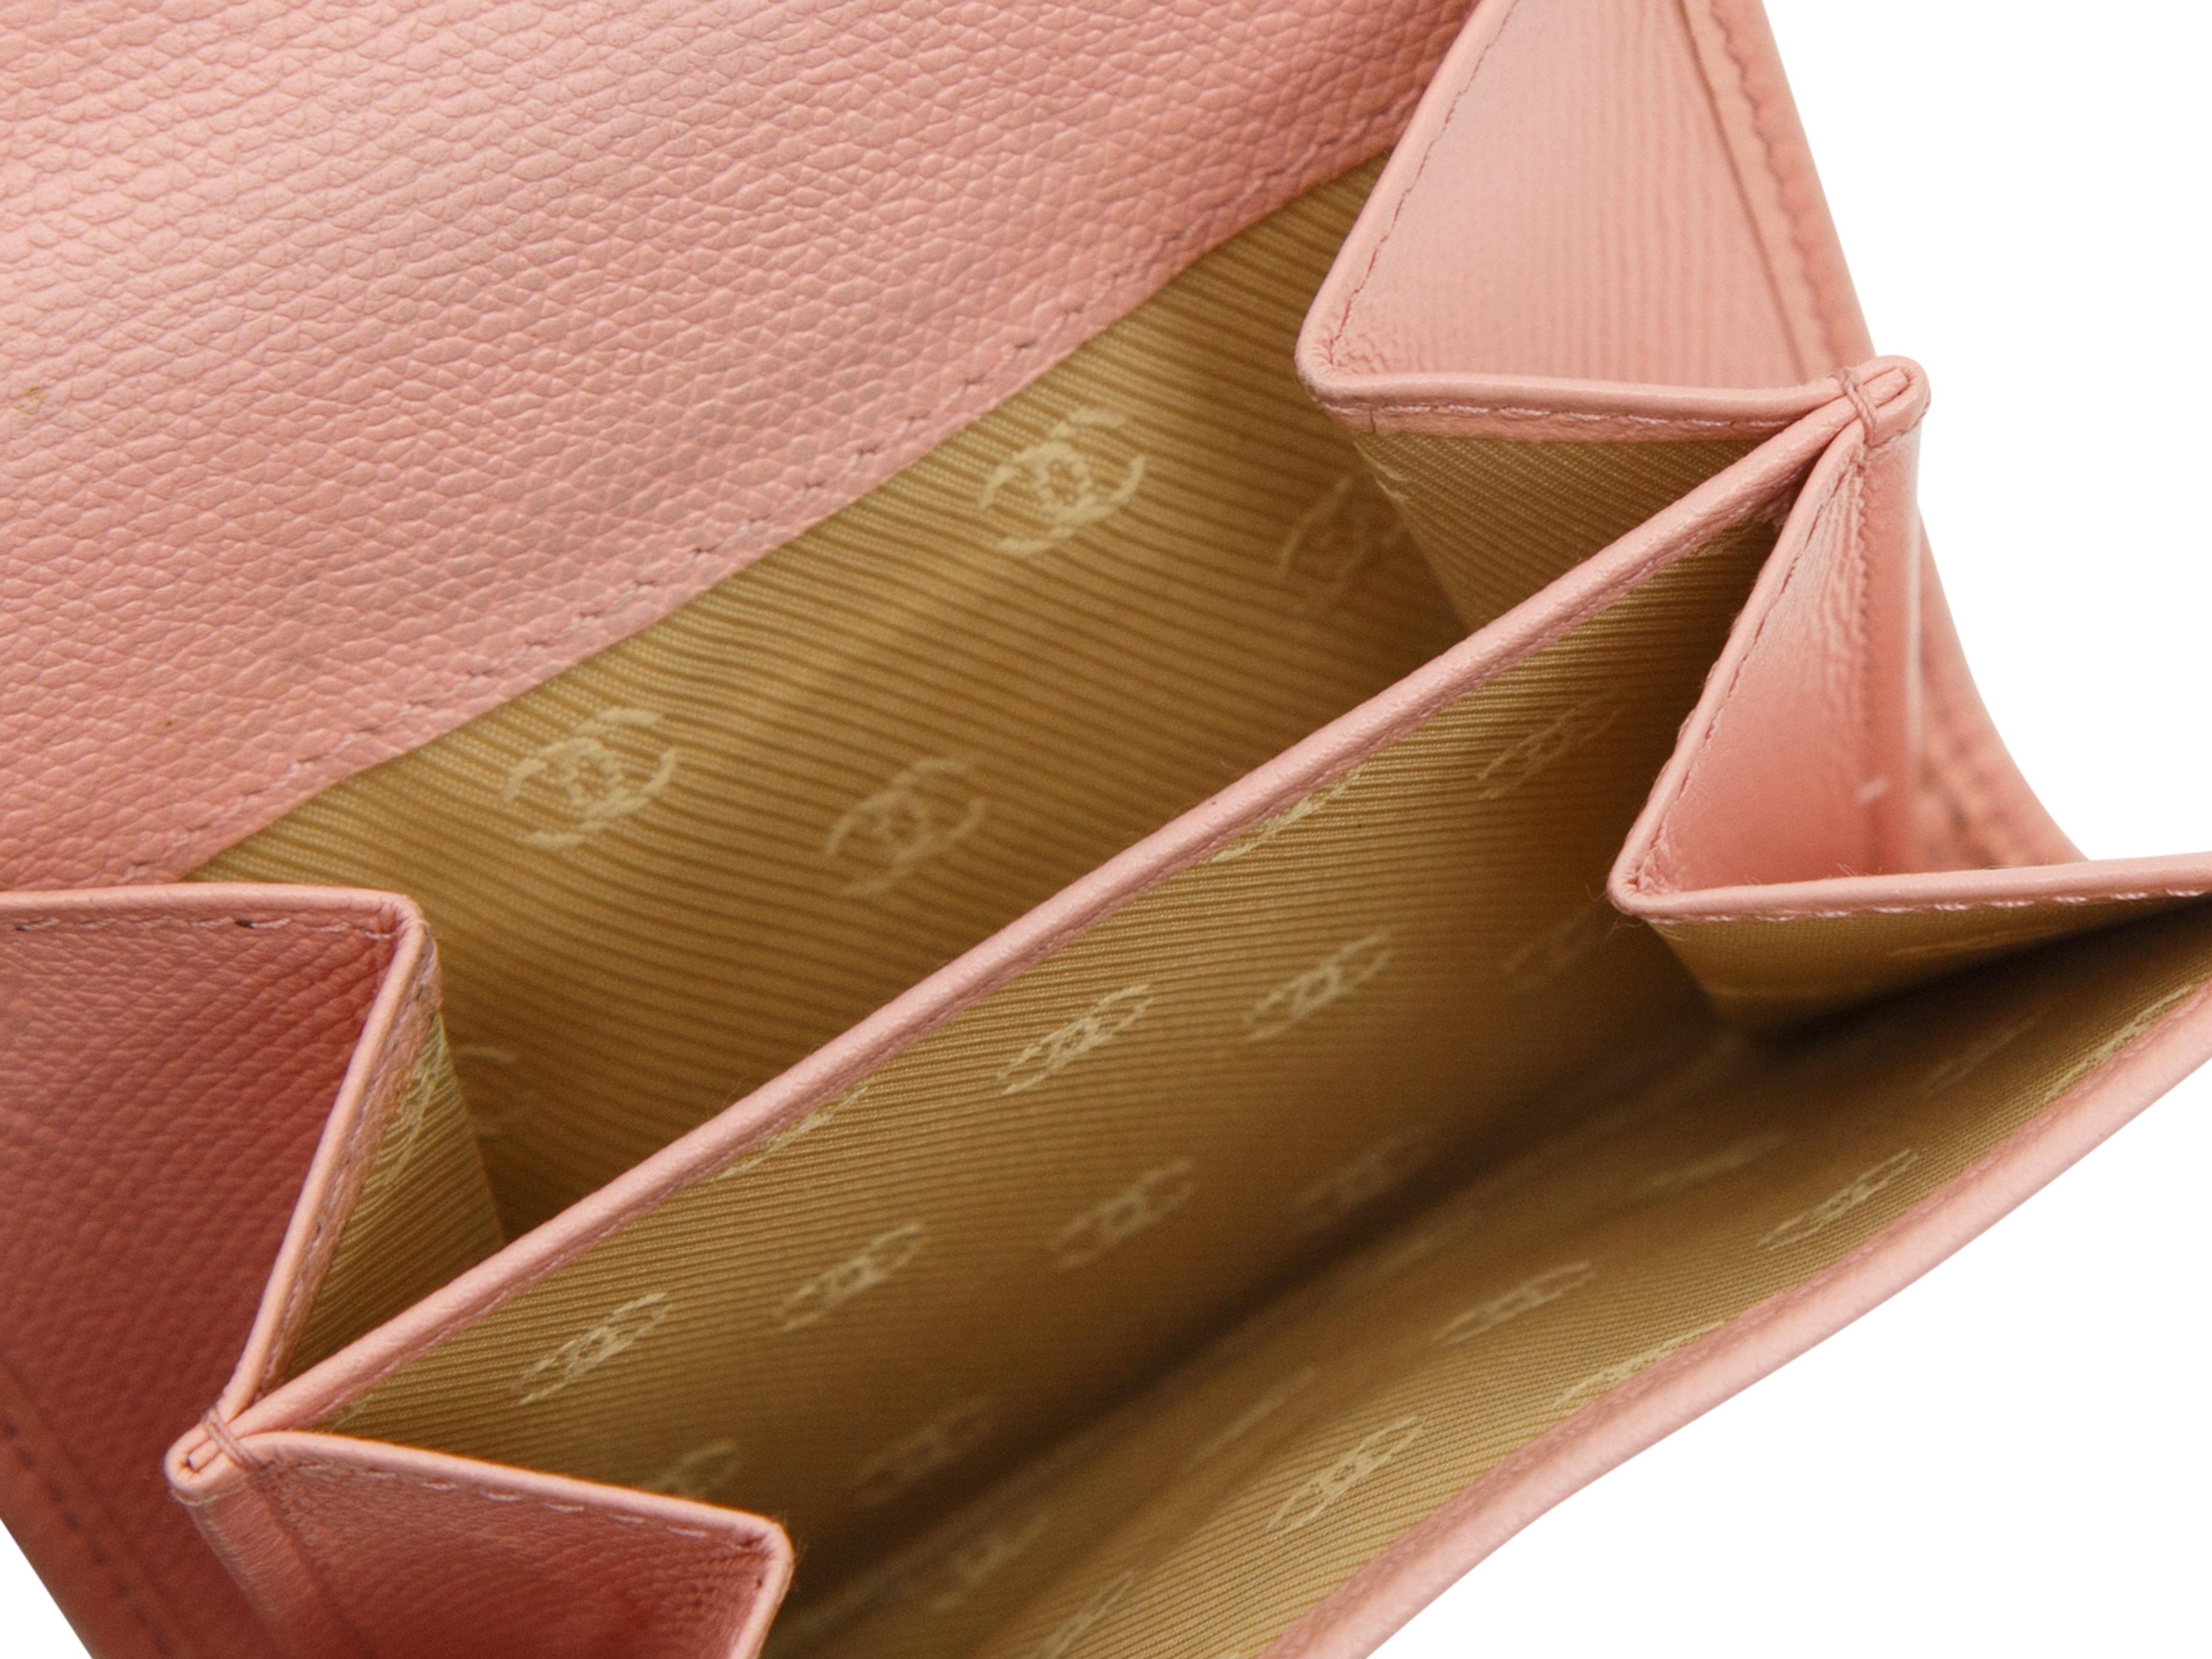 Product details:  Pink leather Sevruga compact wallet by Chanel.  Front flap with snap closure.  Multiple inner credit card slots and bill compartment.  Back flap coin pouch with snap closure.  Goldtone hardware.  4